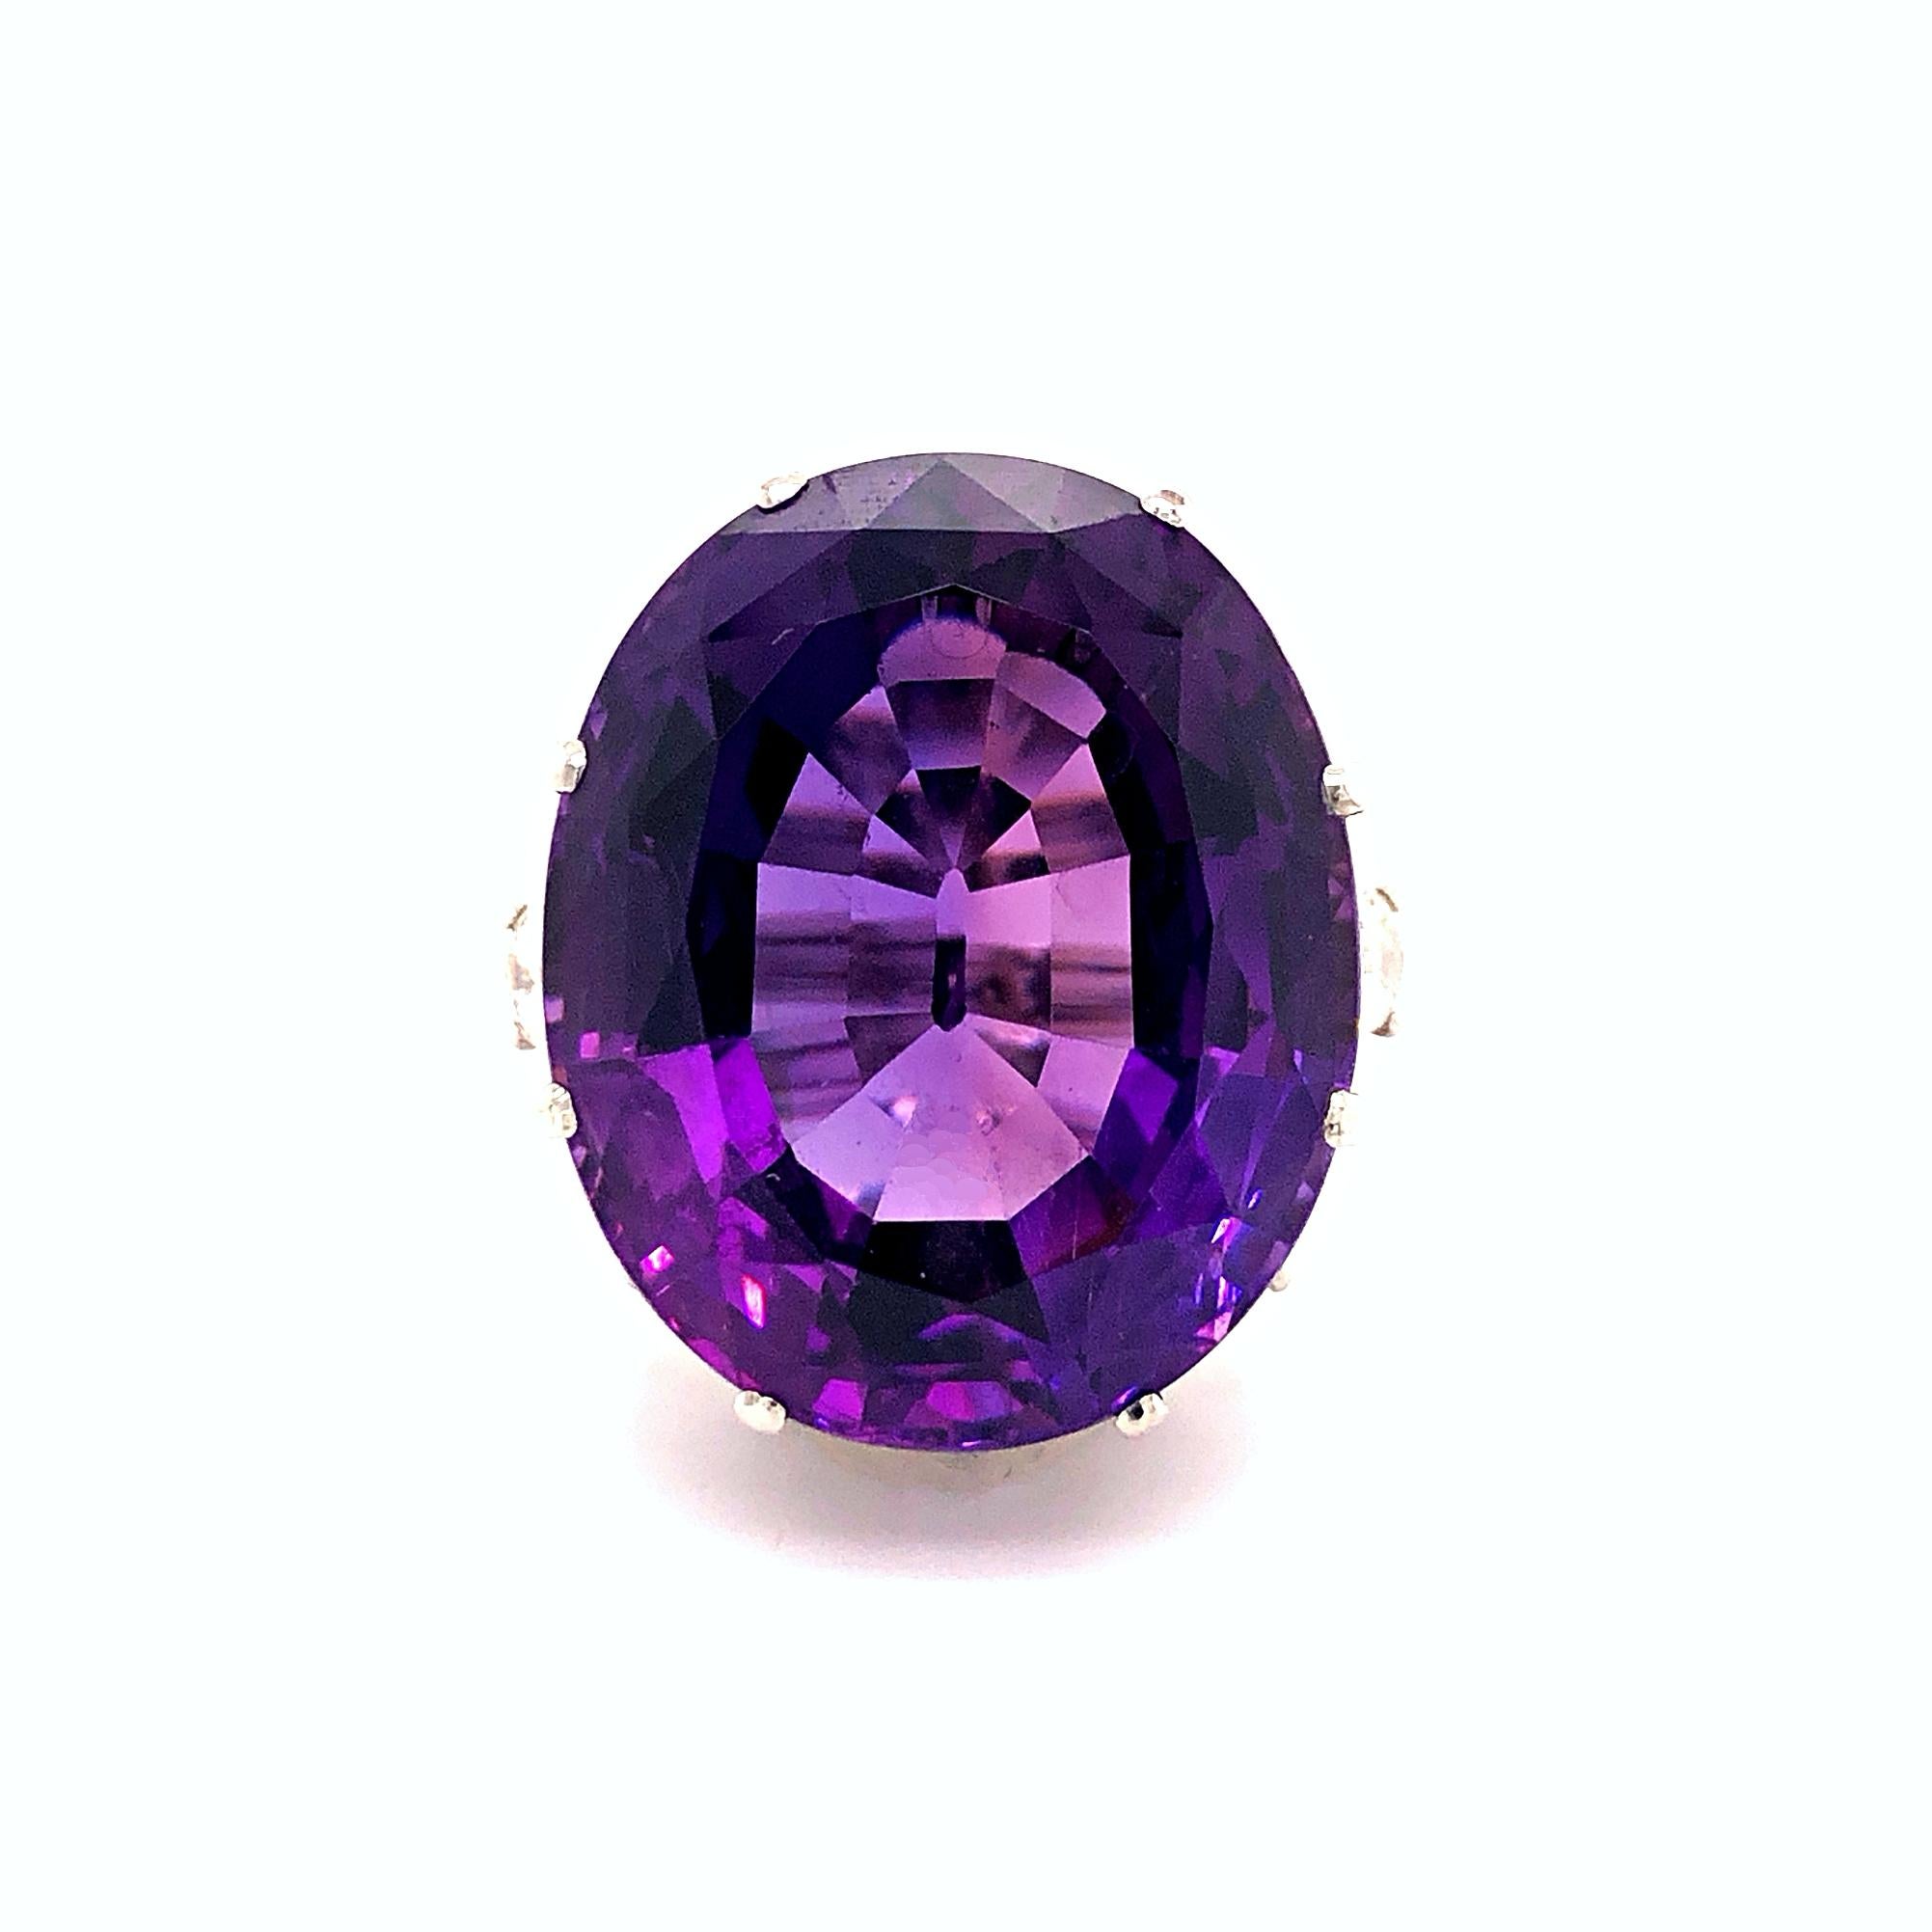 A magnificent large amethyst and diamond cocktail ring in 18k white gold. The oval shaped faceted Siberian amethyst is an impressive stone weighing approximately 42 carats. It has no eye visible inclusions, a spectacular crystal and a vivid